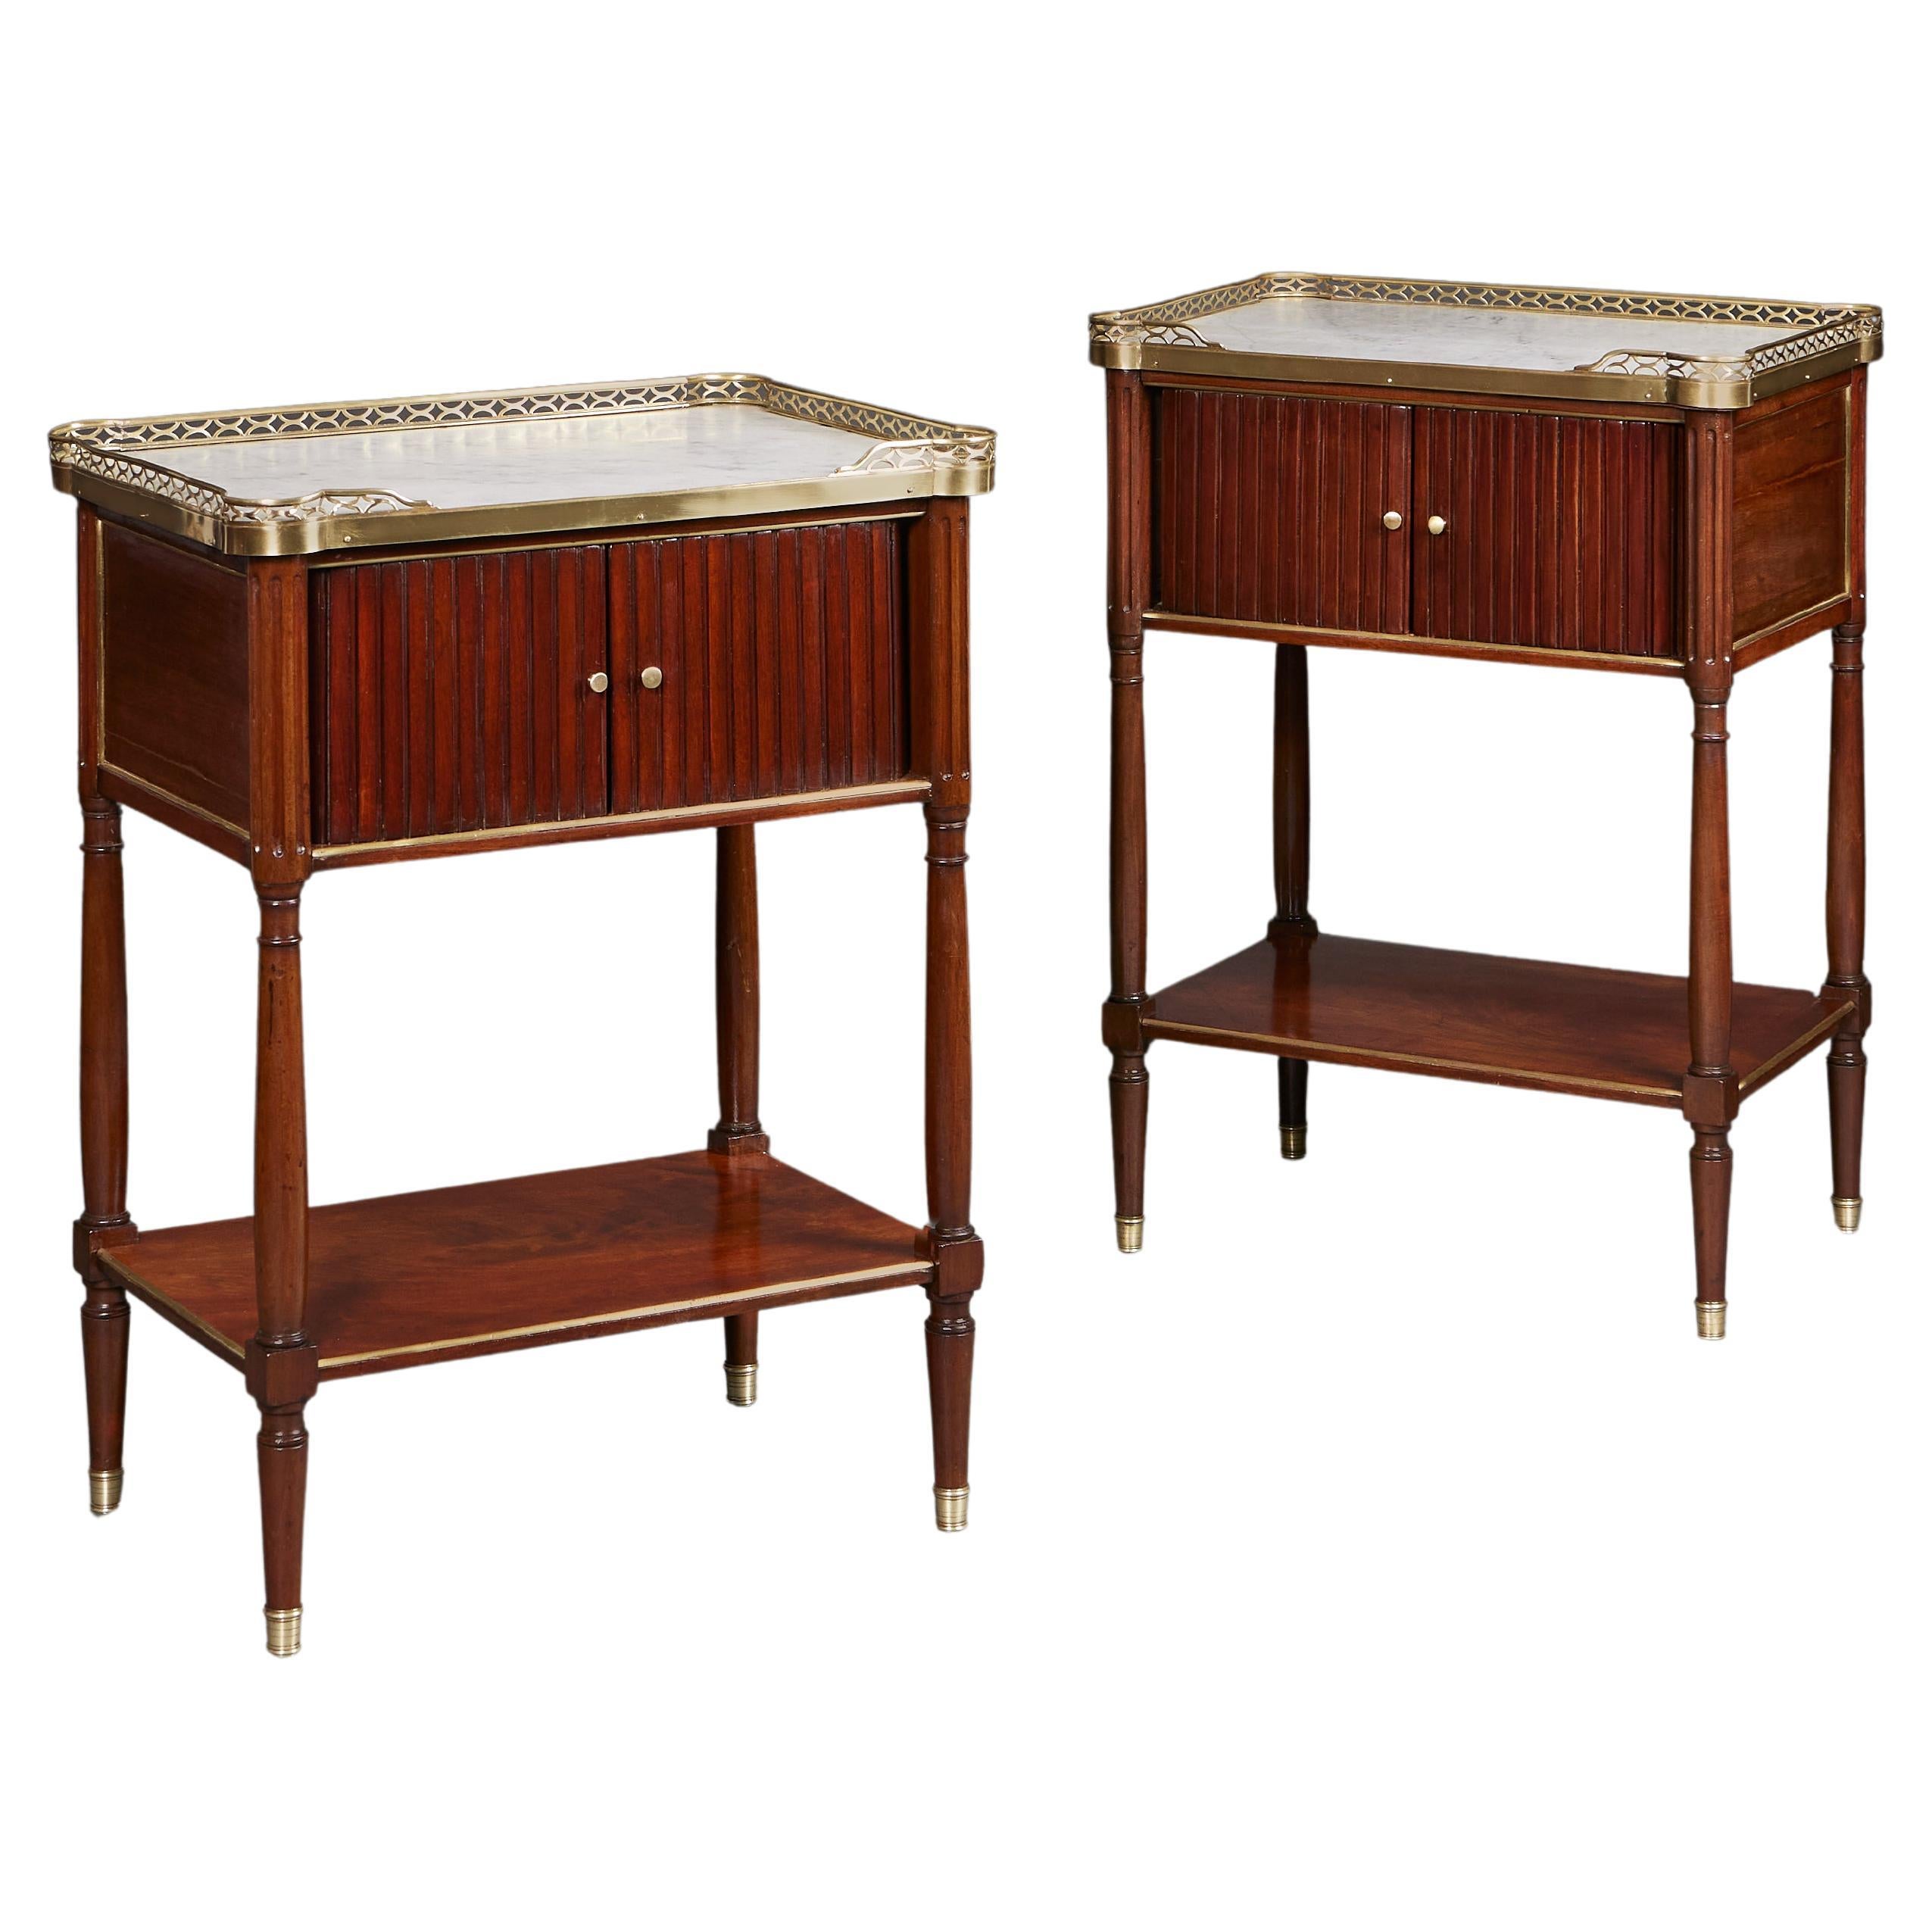 A Fine Pair of Louis XVI Tambour Front Bedside Tables 